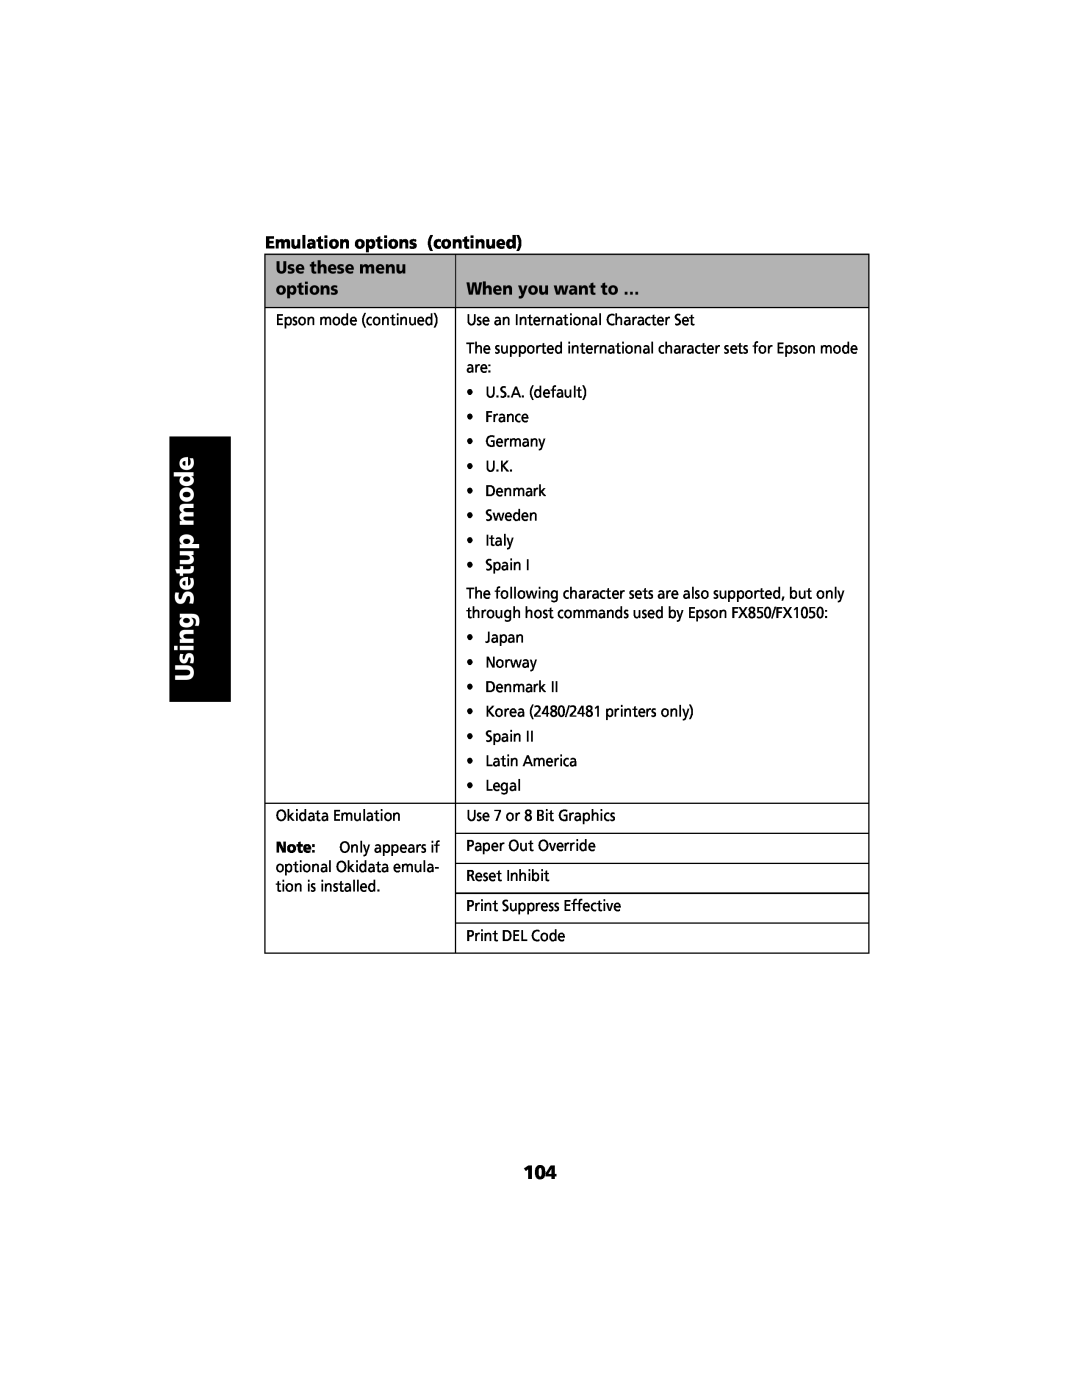 Lexmark 2480 manual Using Setup mode, Epson mode continued, The supported international character sets for Epson mode 